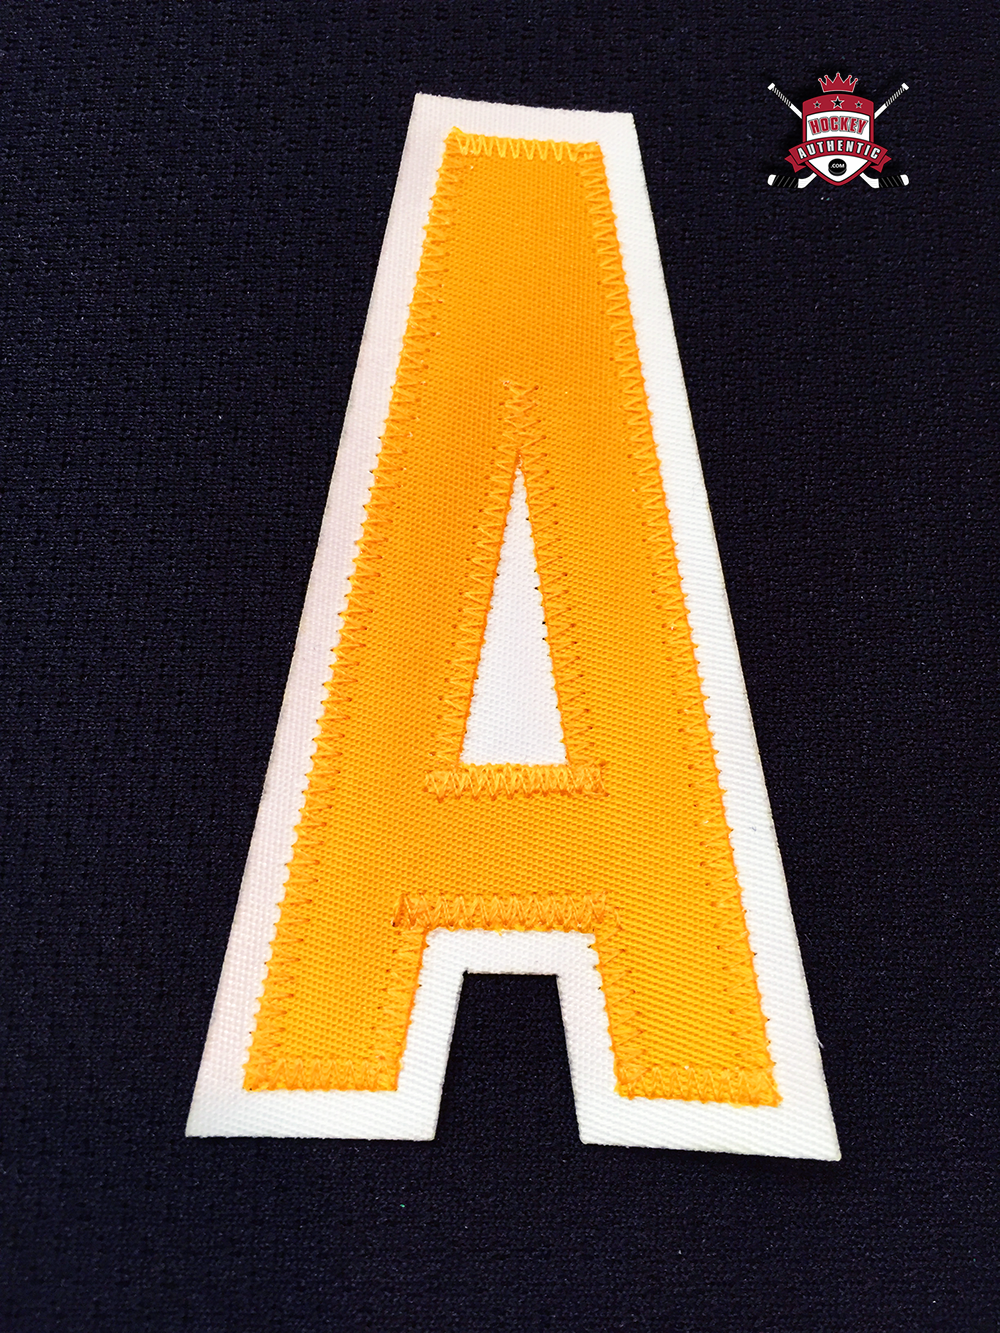 pittsburgh penguins jersey patches